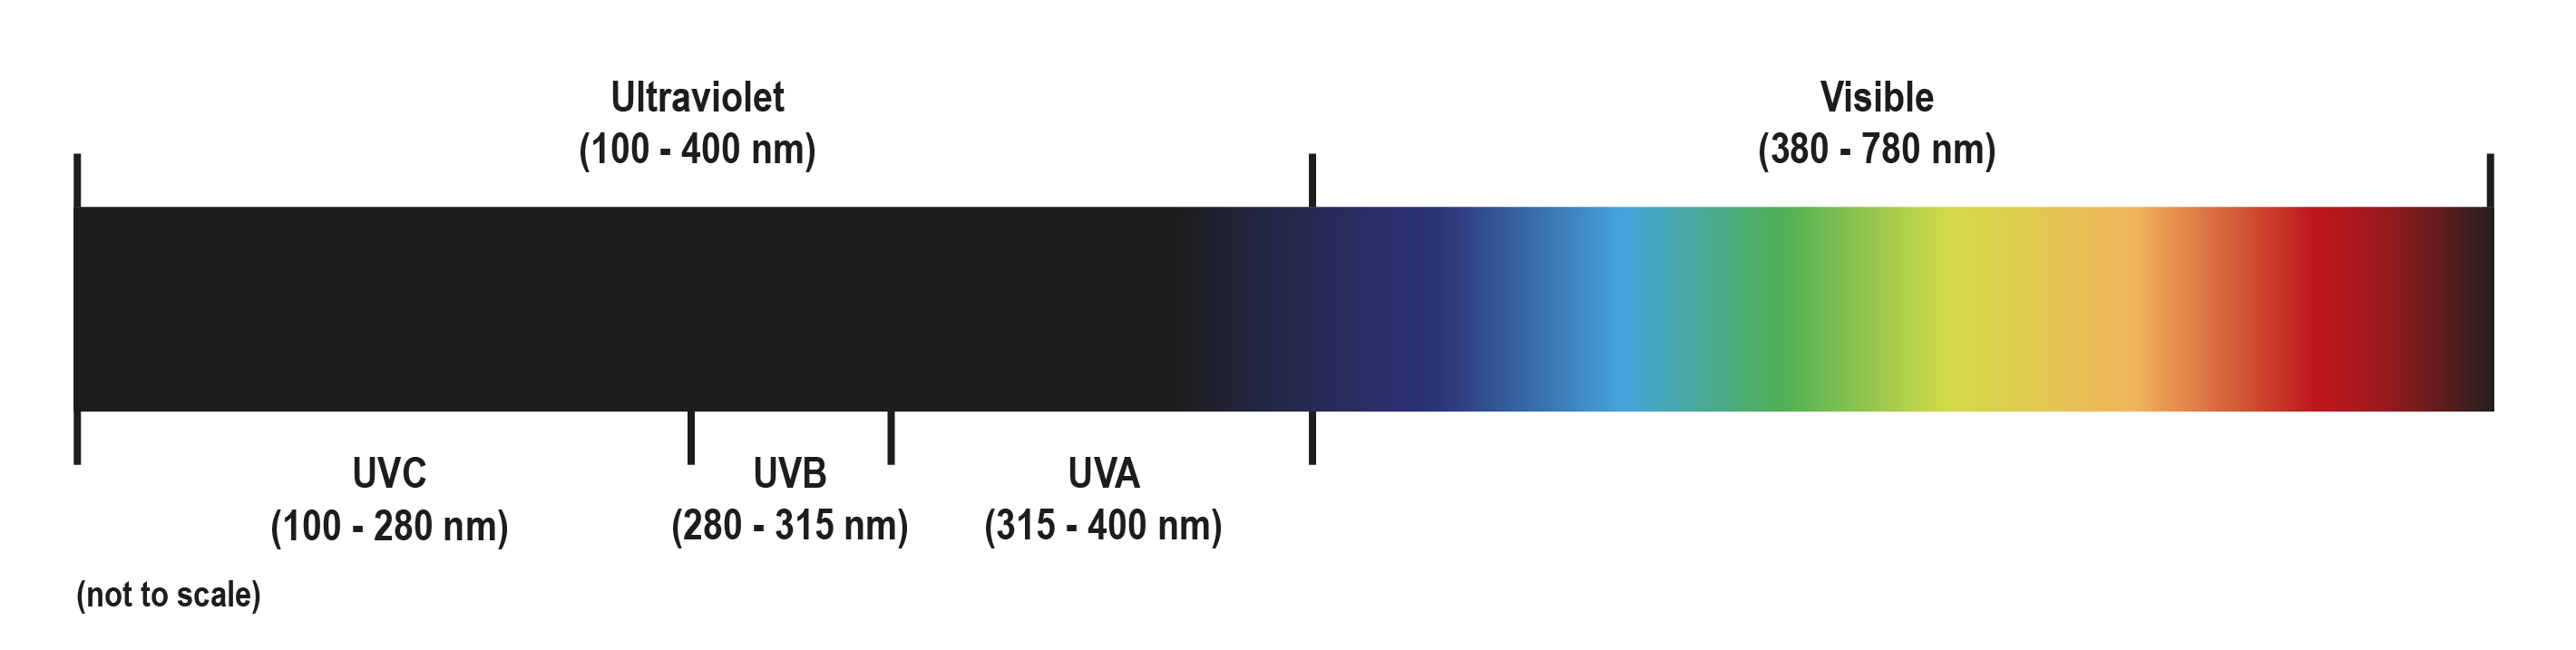 The electromagnetic (EM) spectrum from UV to visible light